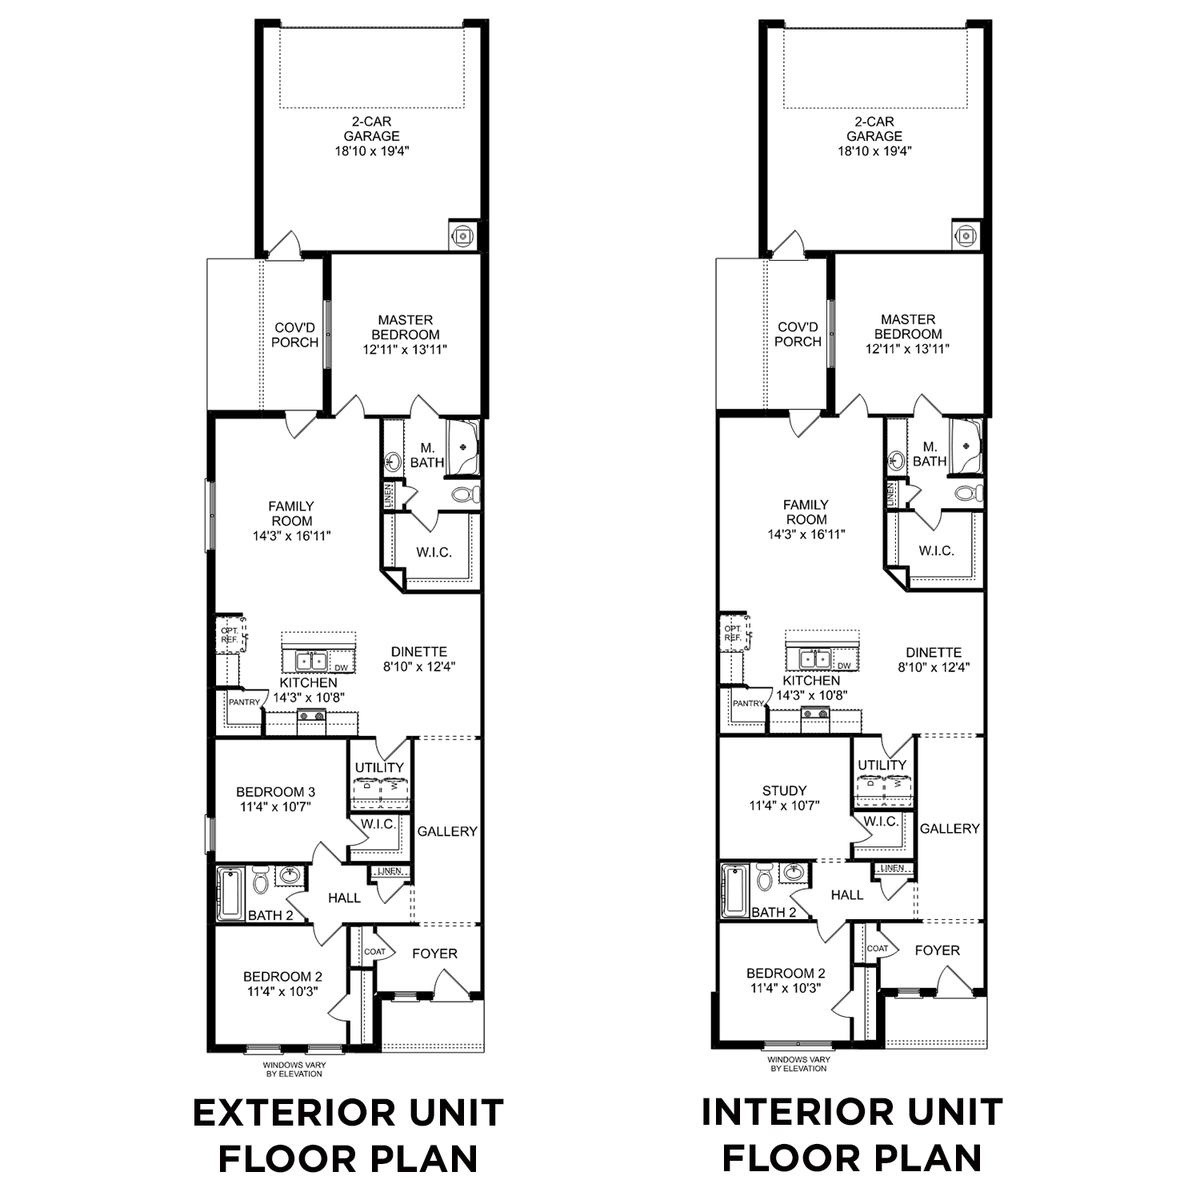 1 - The Camilla B floor plan layout for 431 Ronnie Drive in Davidson Homes' Cain Park community.